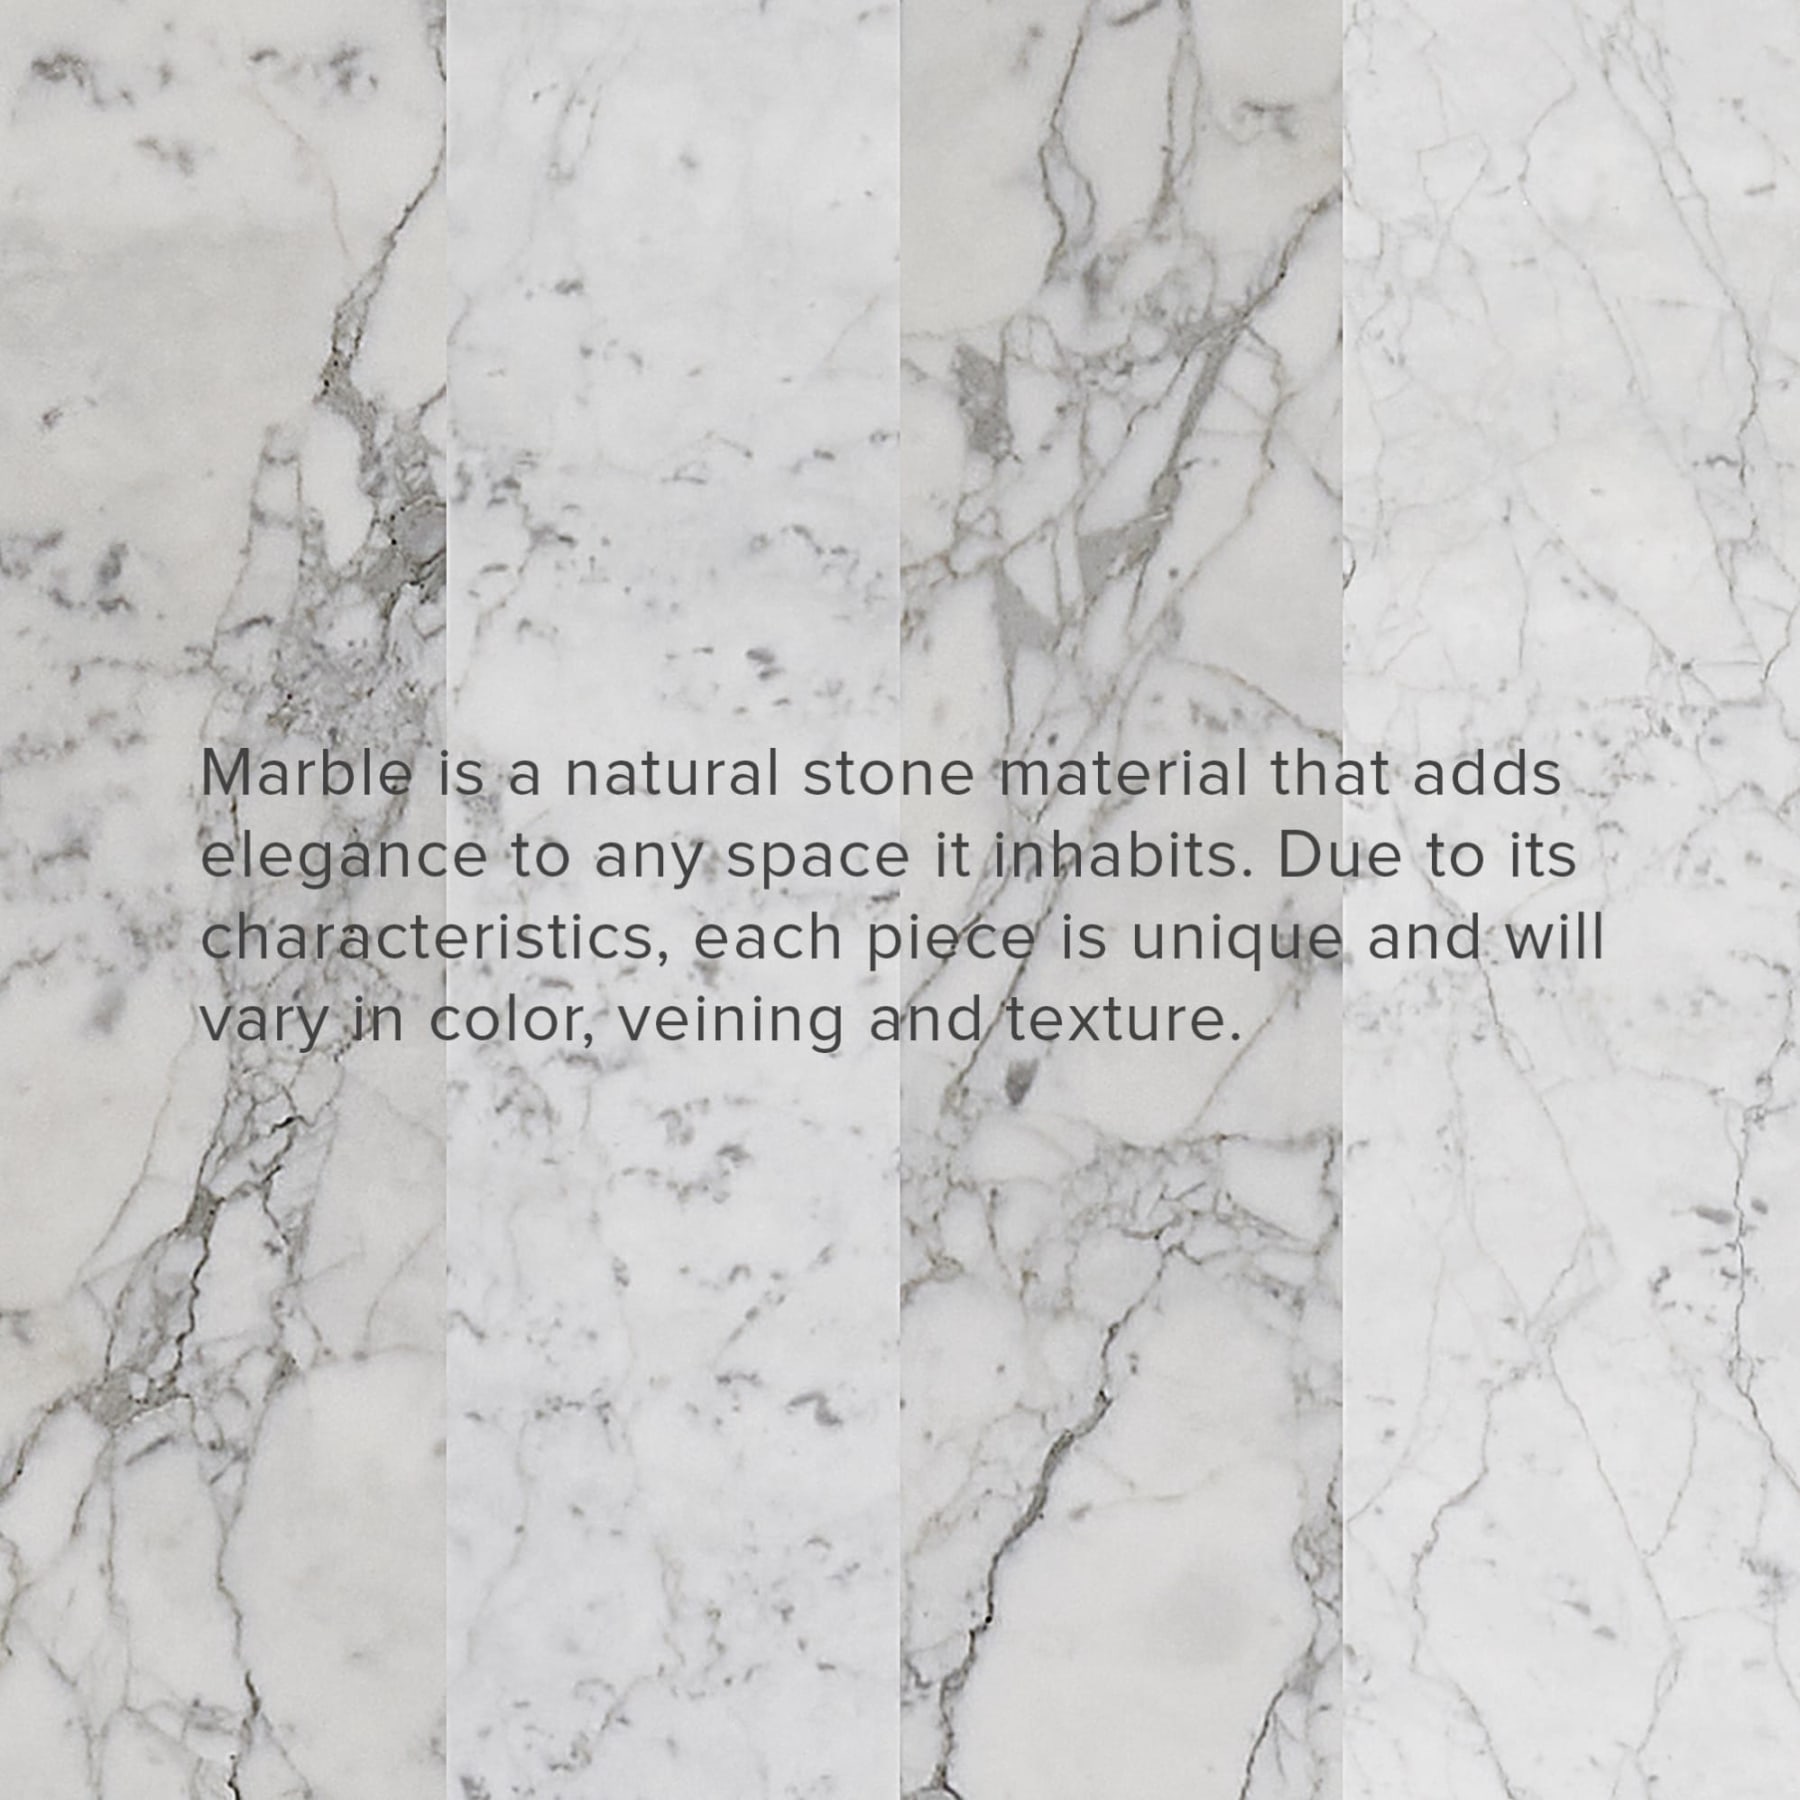 A close-up shot of different marble slabs.